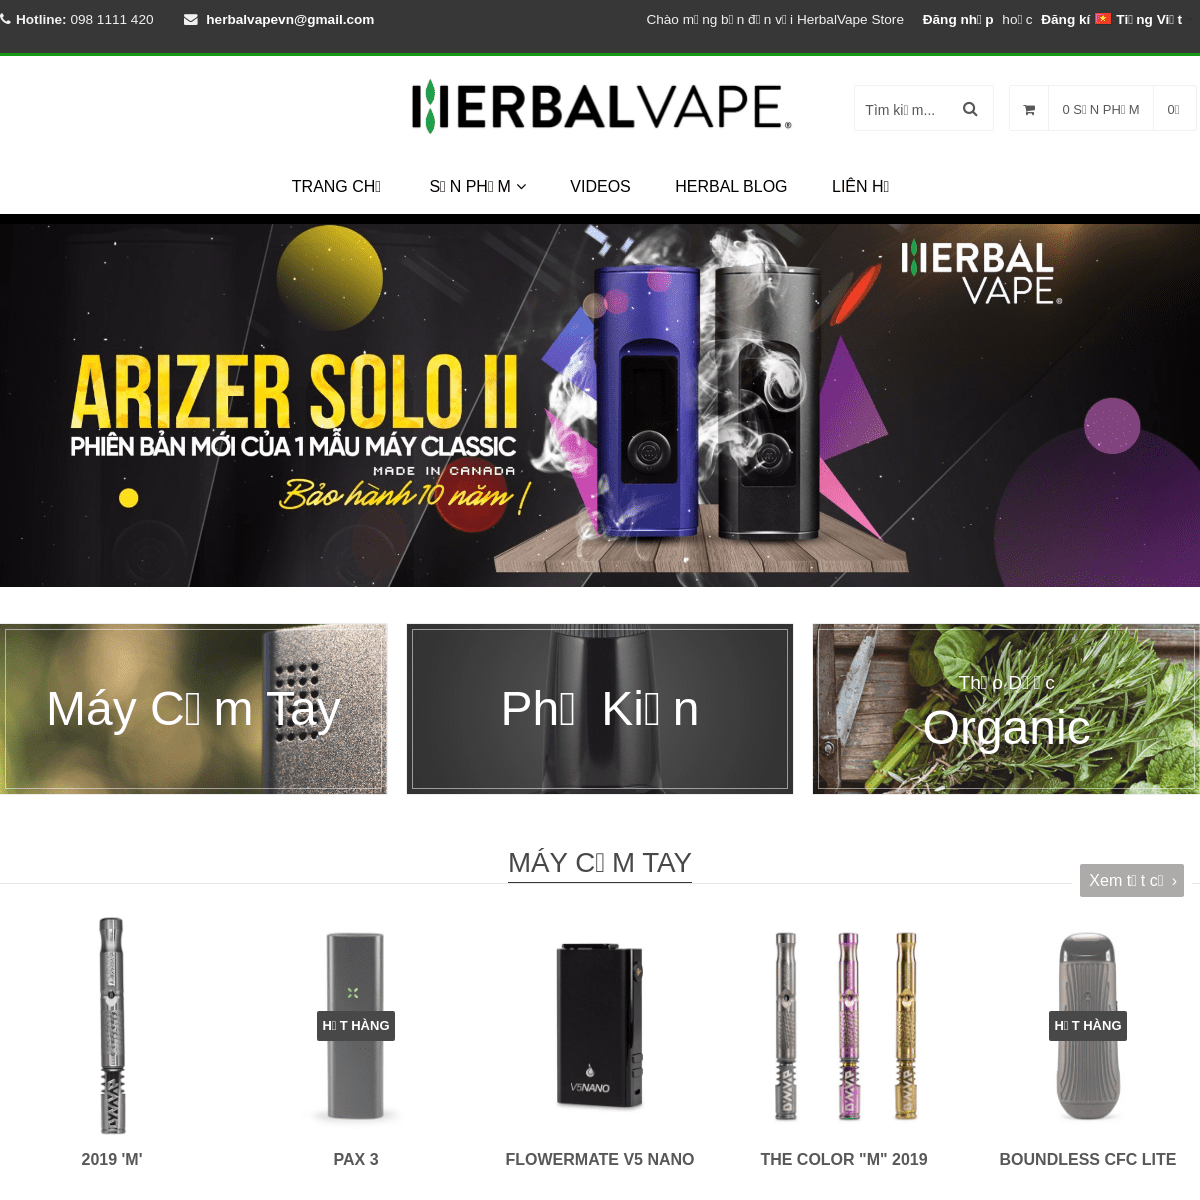 A complete backup of herbalvape.vn